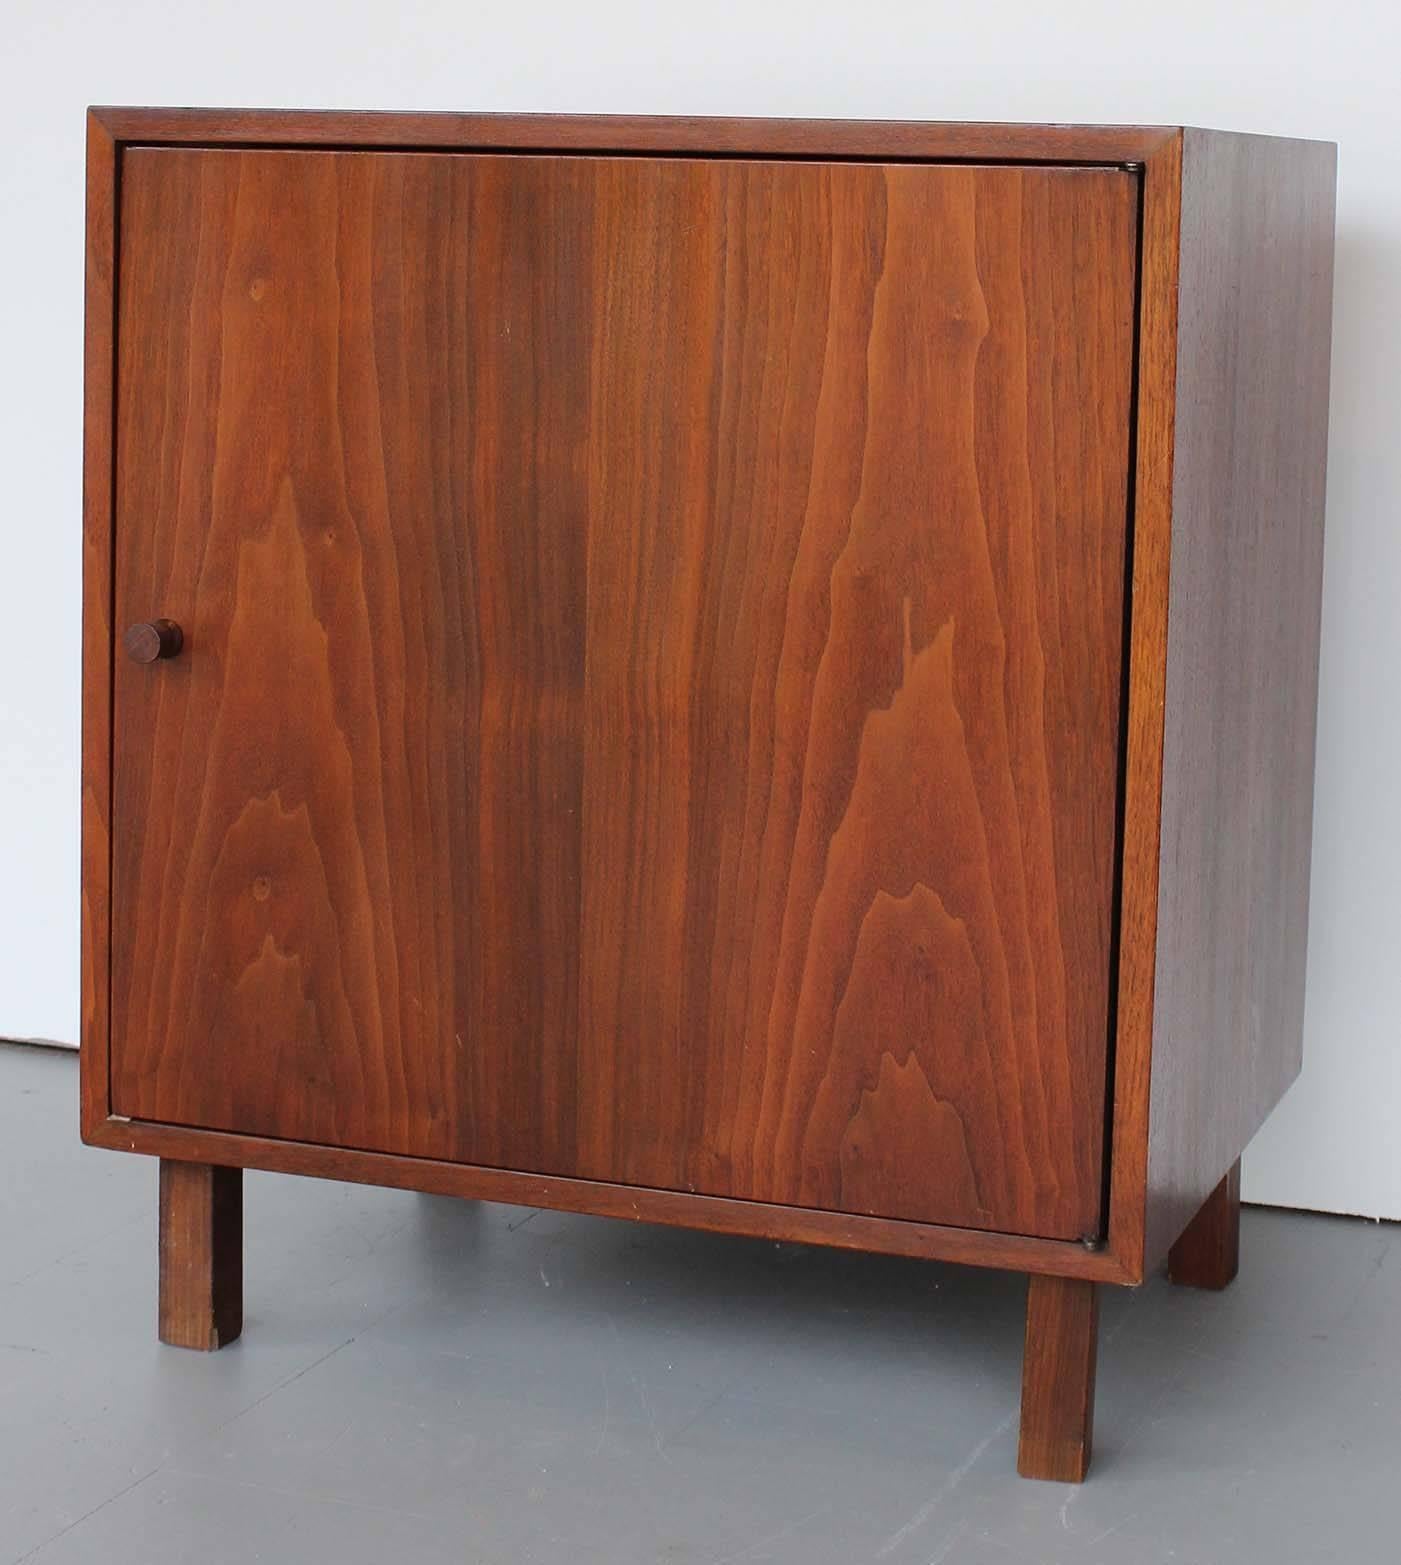 A pair of Mid-Century Danish walnut cabinets with walnut pulls and legs.

